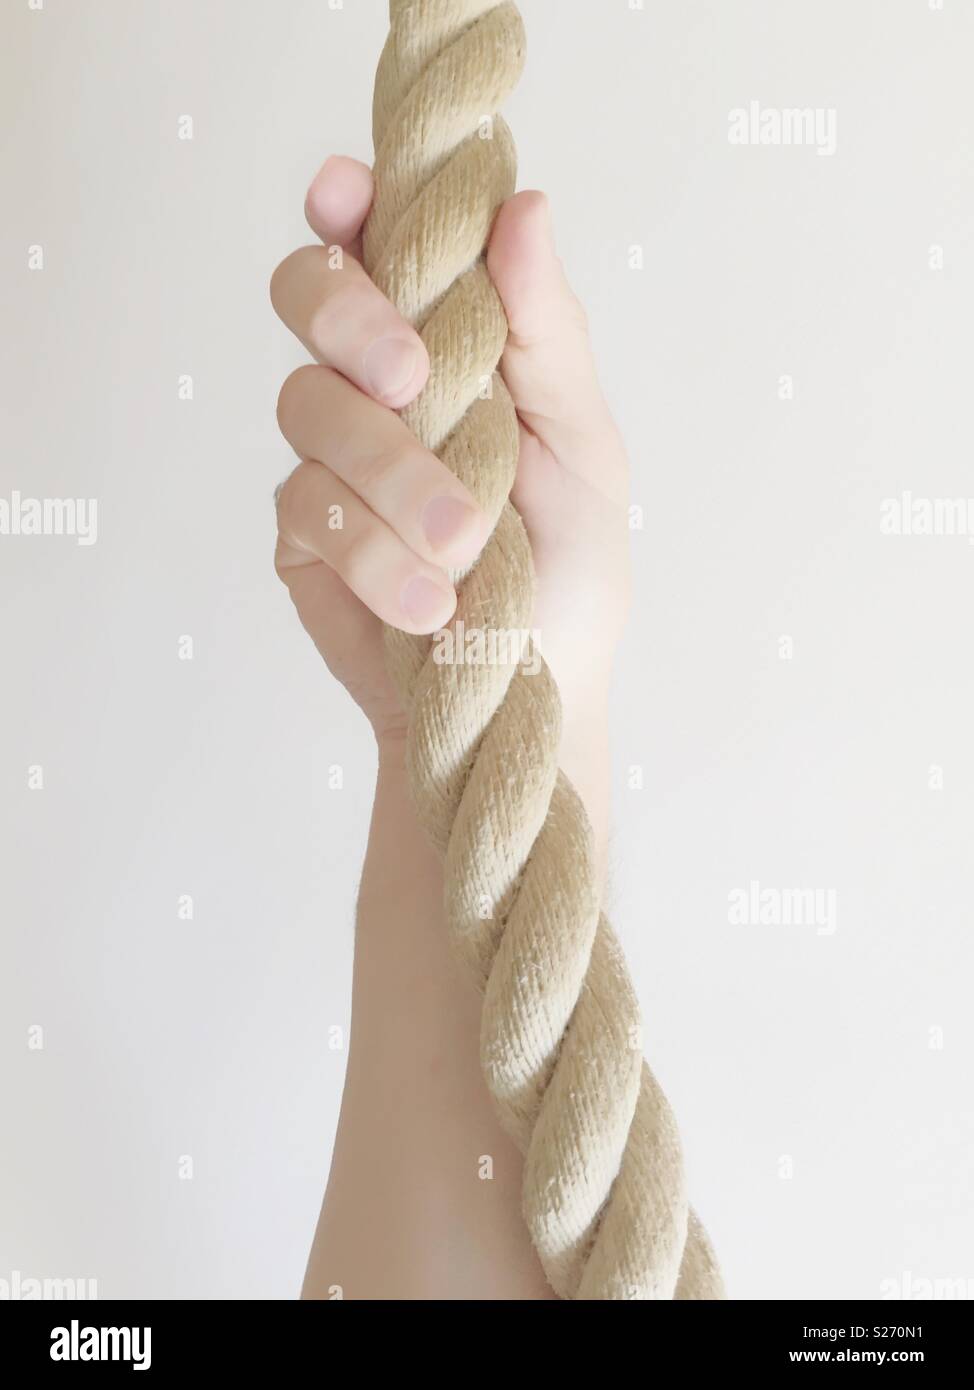 A male hand and arm gripping a thick piece of rope tightly on a white background Stock Photo